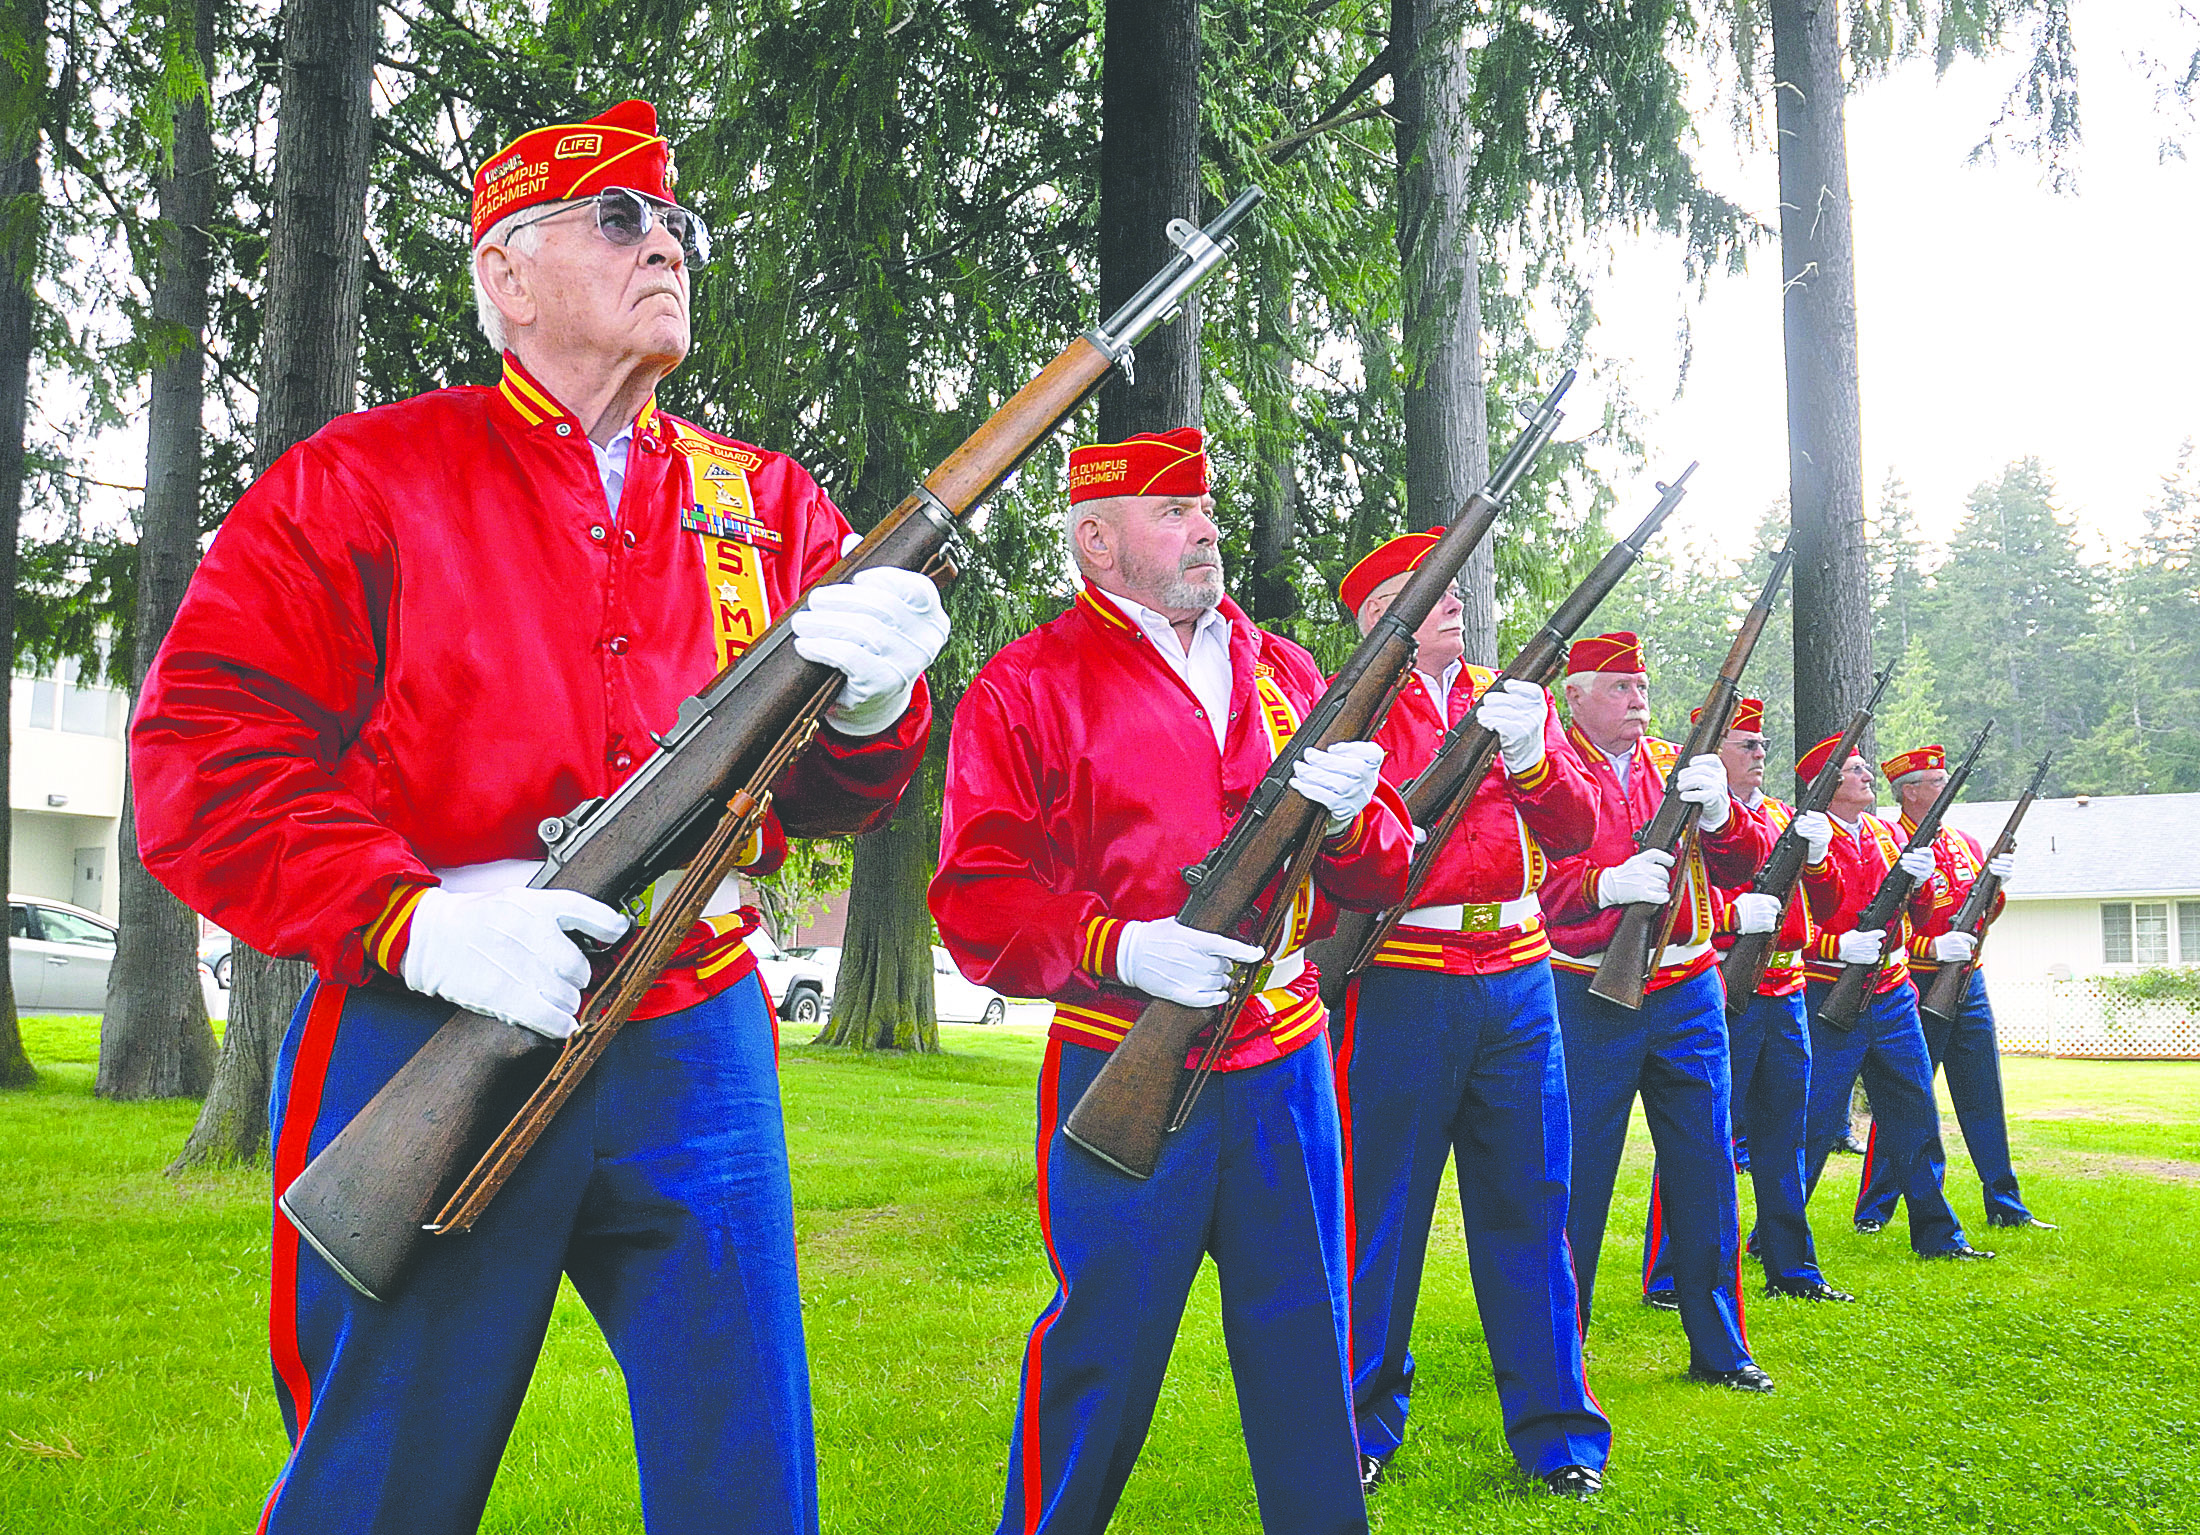 Members of the Marine Corps League Honor Guard Mount Olympus Detachment 897 perform a rifle salute during a Memorial Day service at the Clallam County Veterans' Center in Port Angeles on Monday. From left is Don Alward